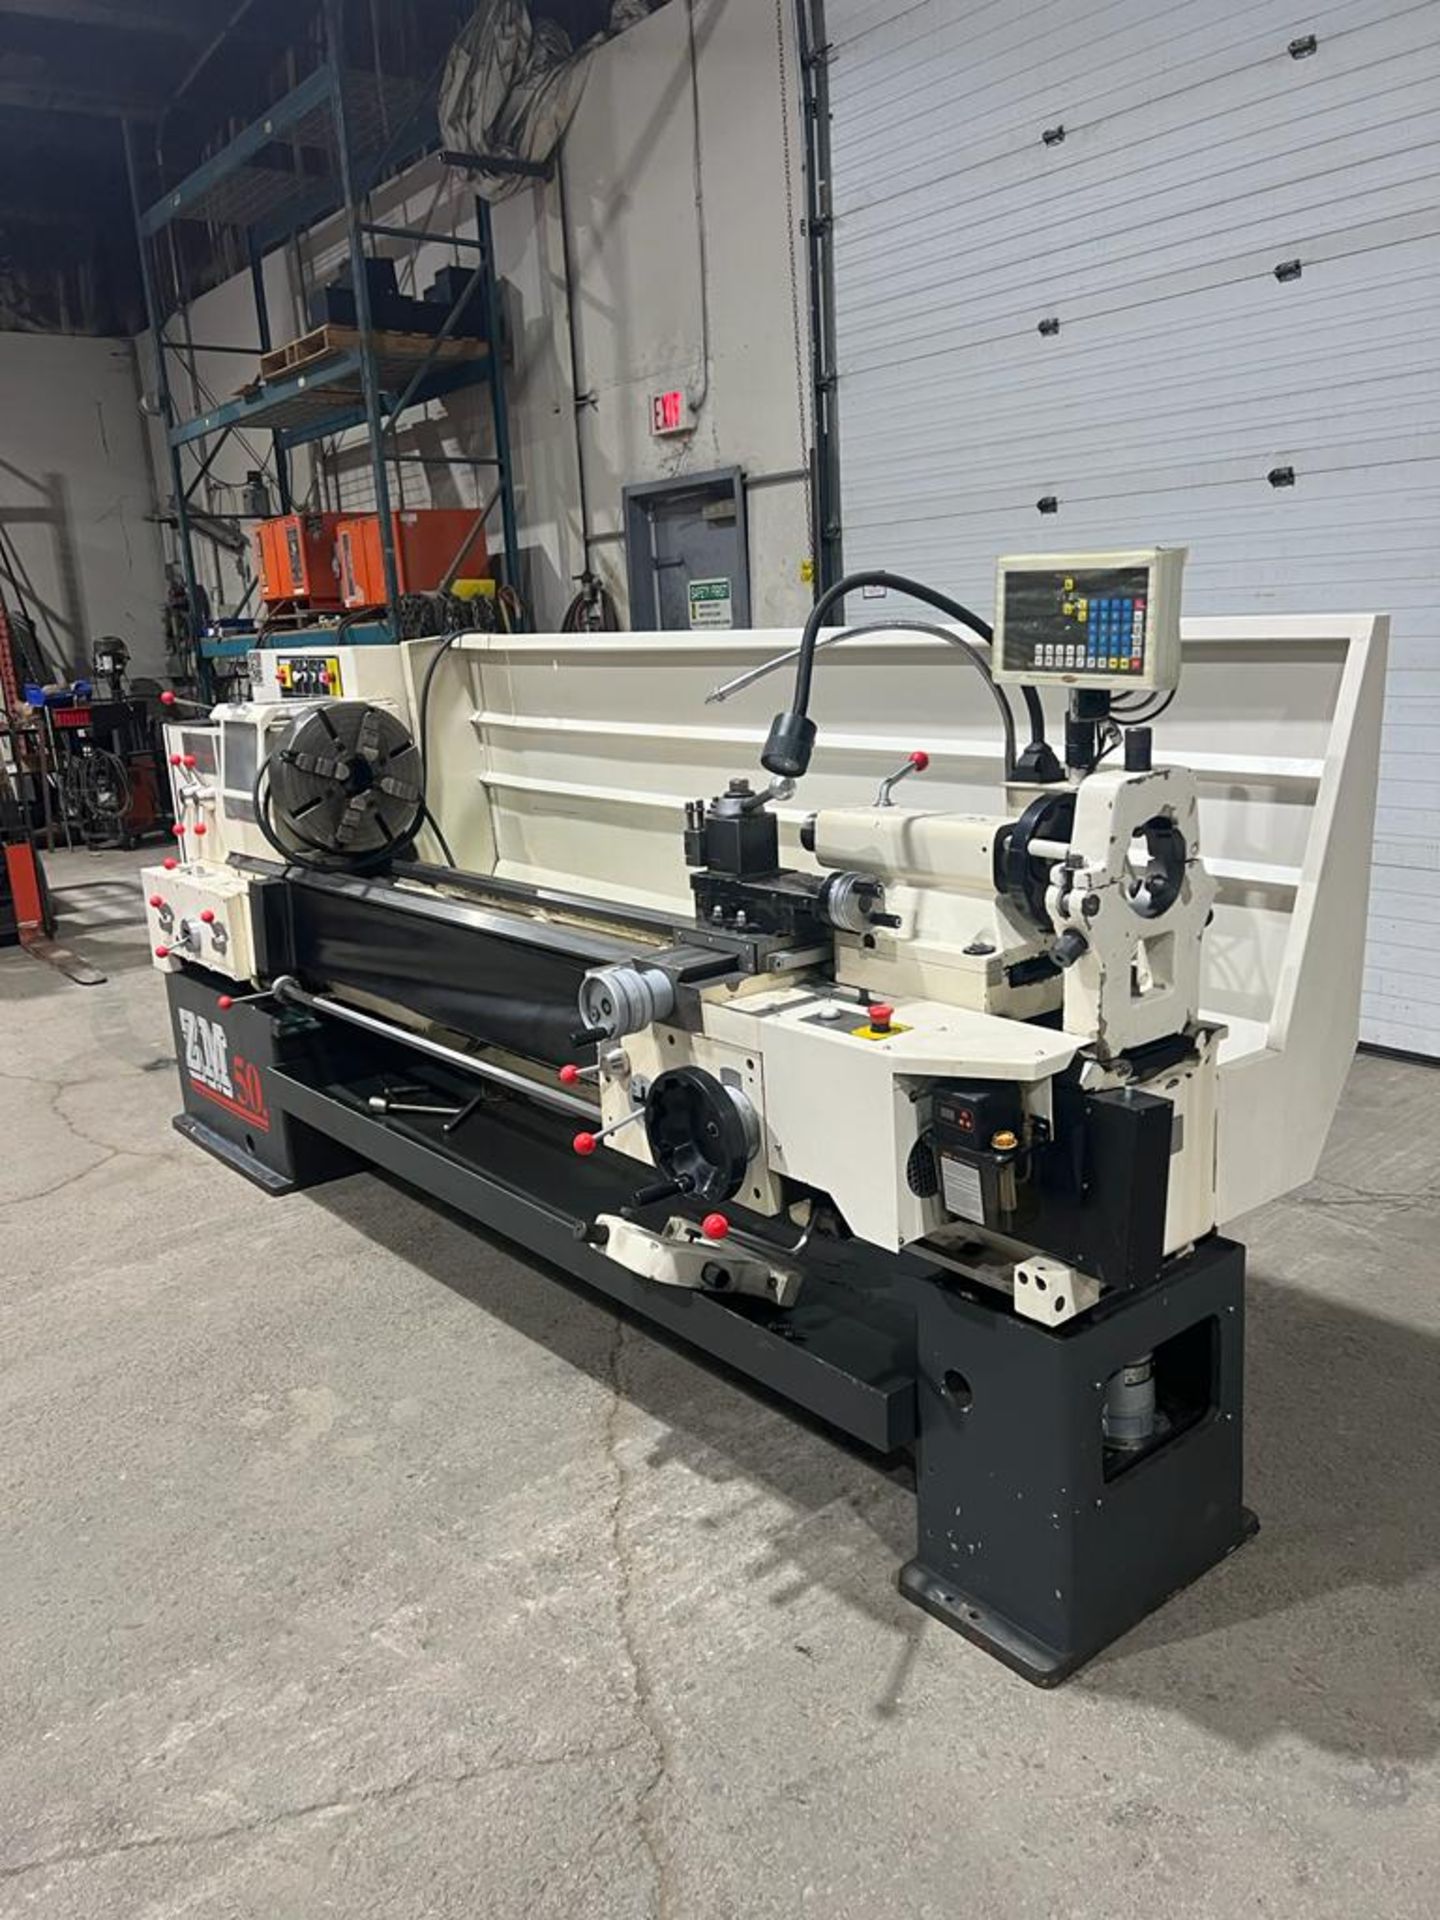 2015 Yuwe Engine Lathe 20x80 - with 20" Swing and 80" Long Bed with Tailstock, Digital Readout (DRO) - Image 2 of 7